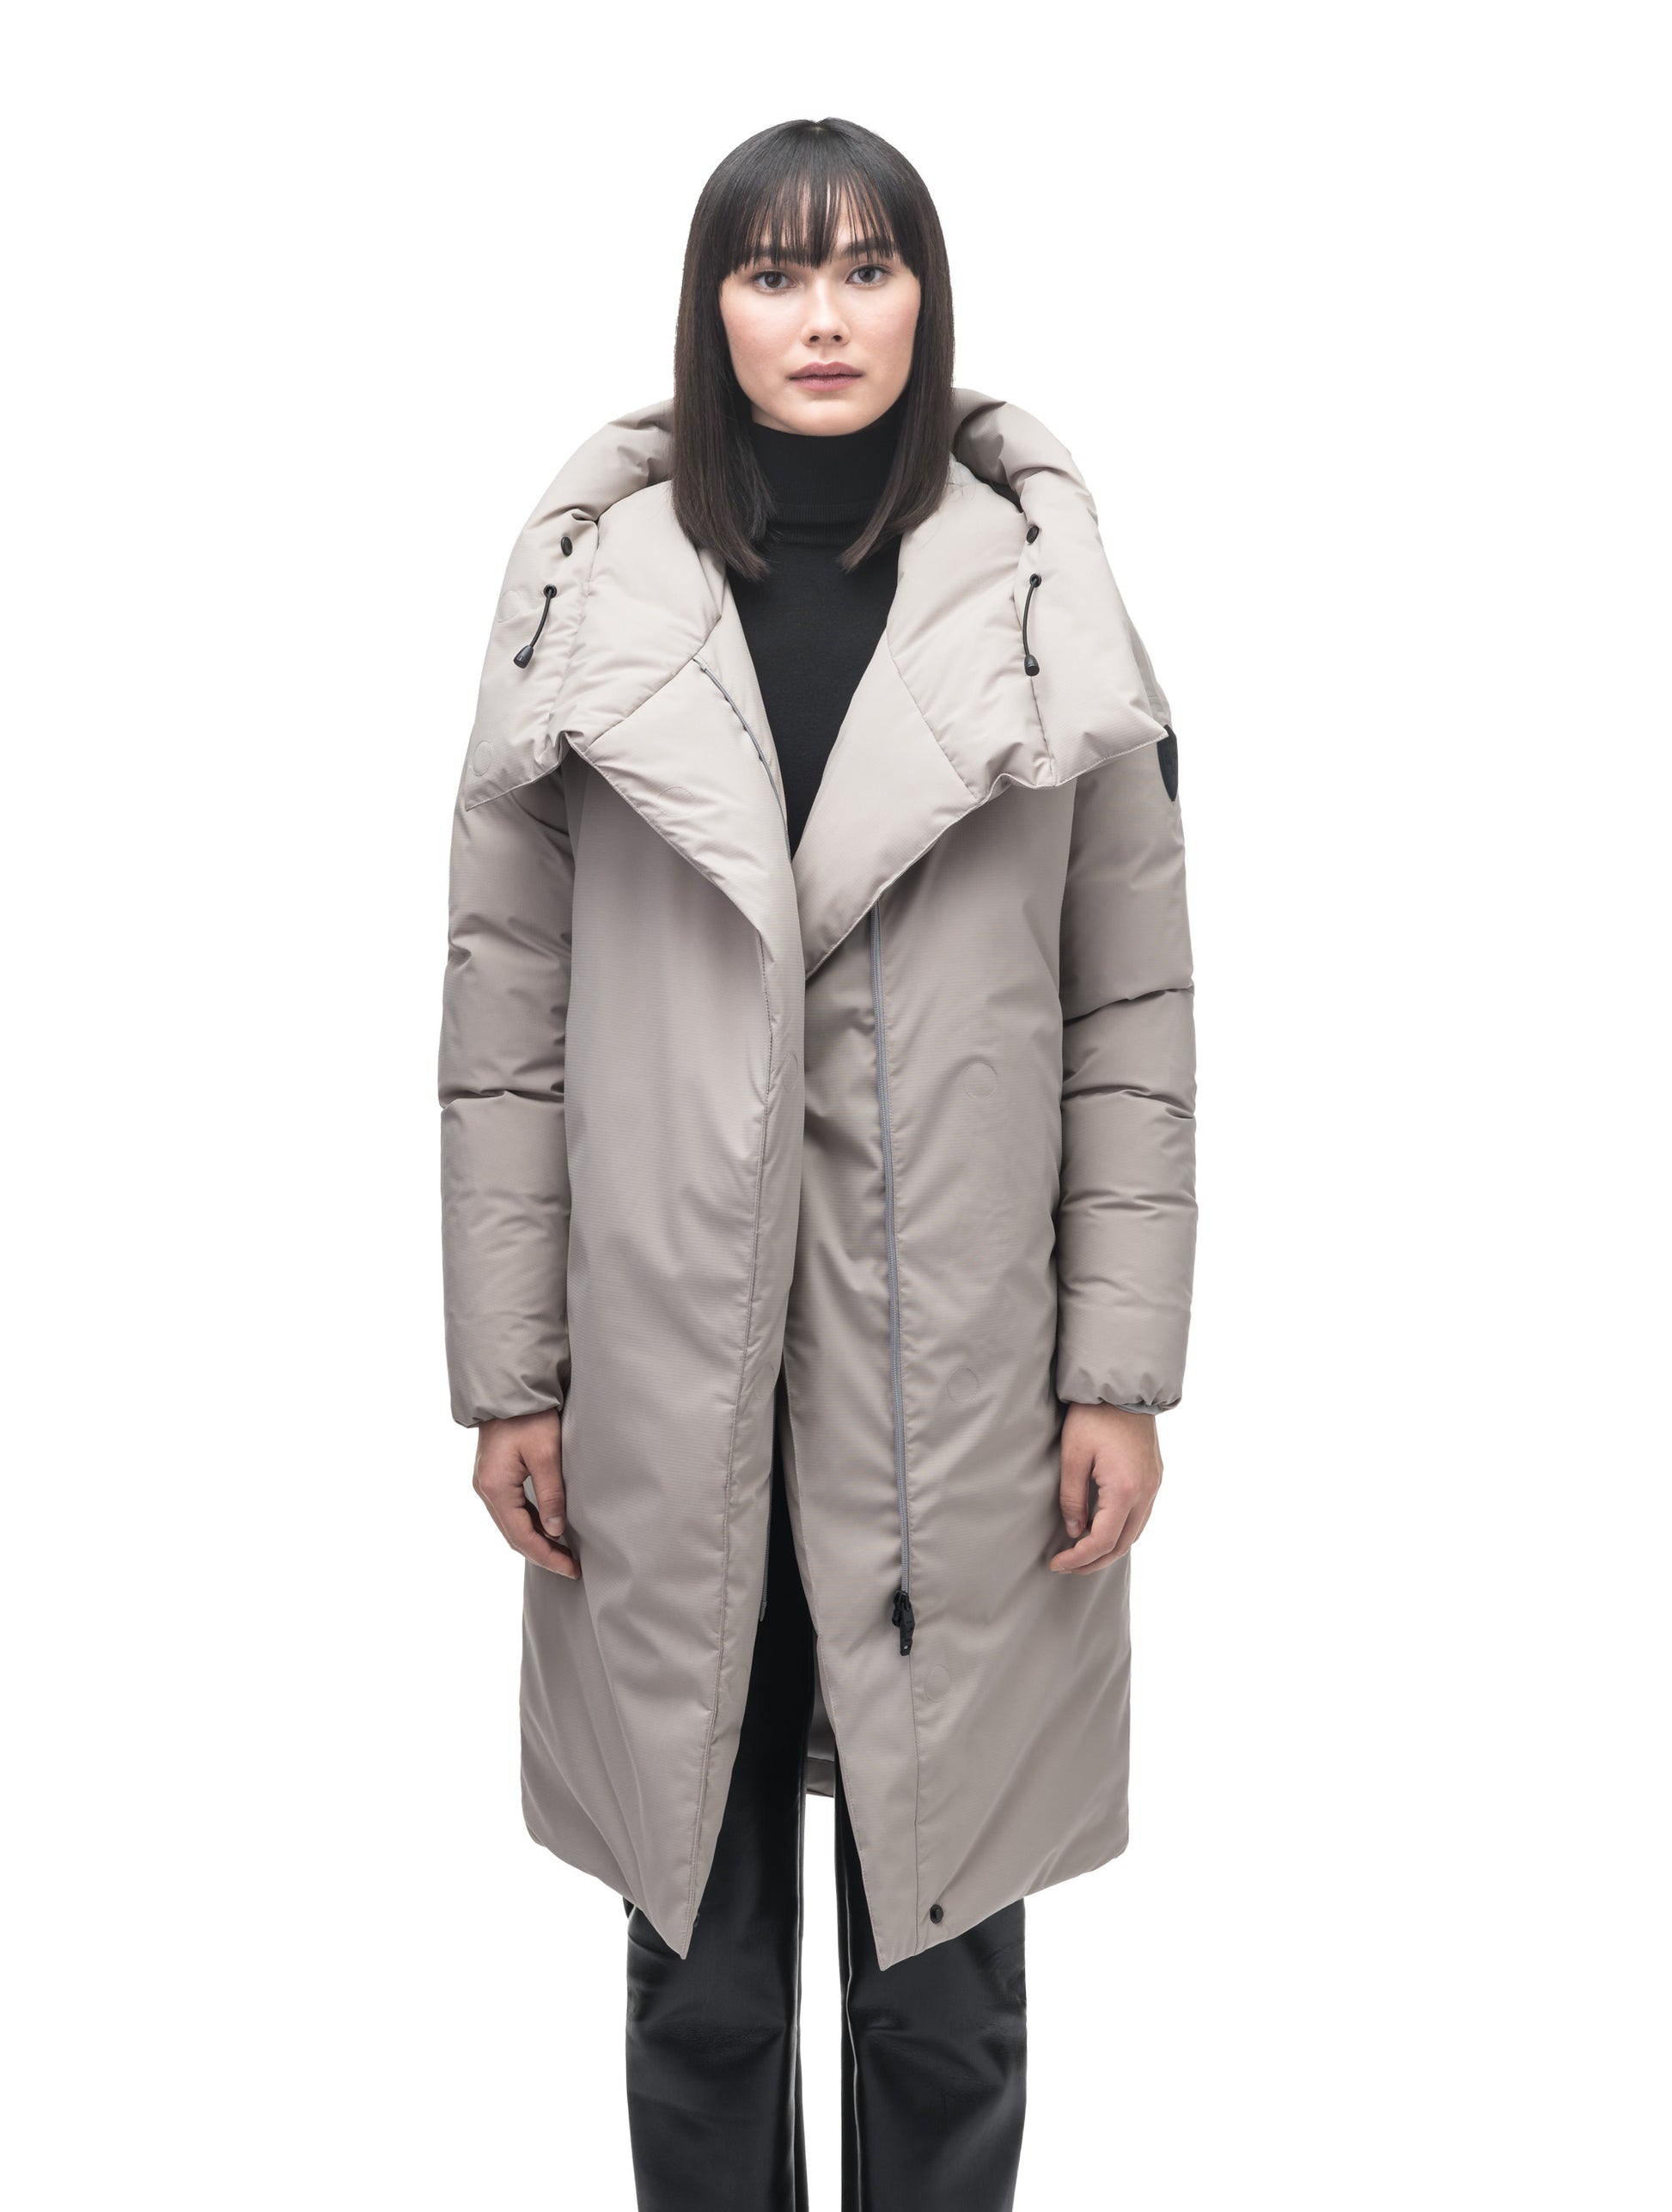 Axis Ladies Oversized Coat in knee length, Canadian duck down insulation, and two-way front zipper, in Clay